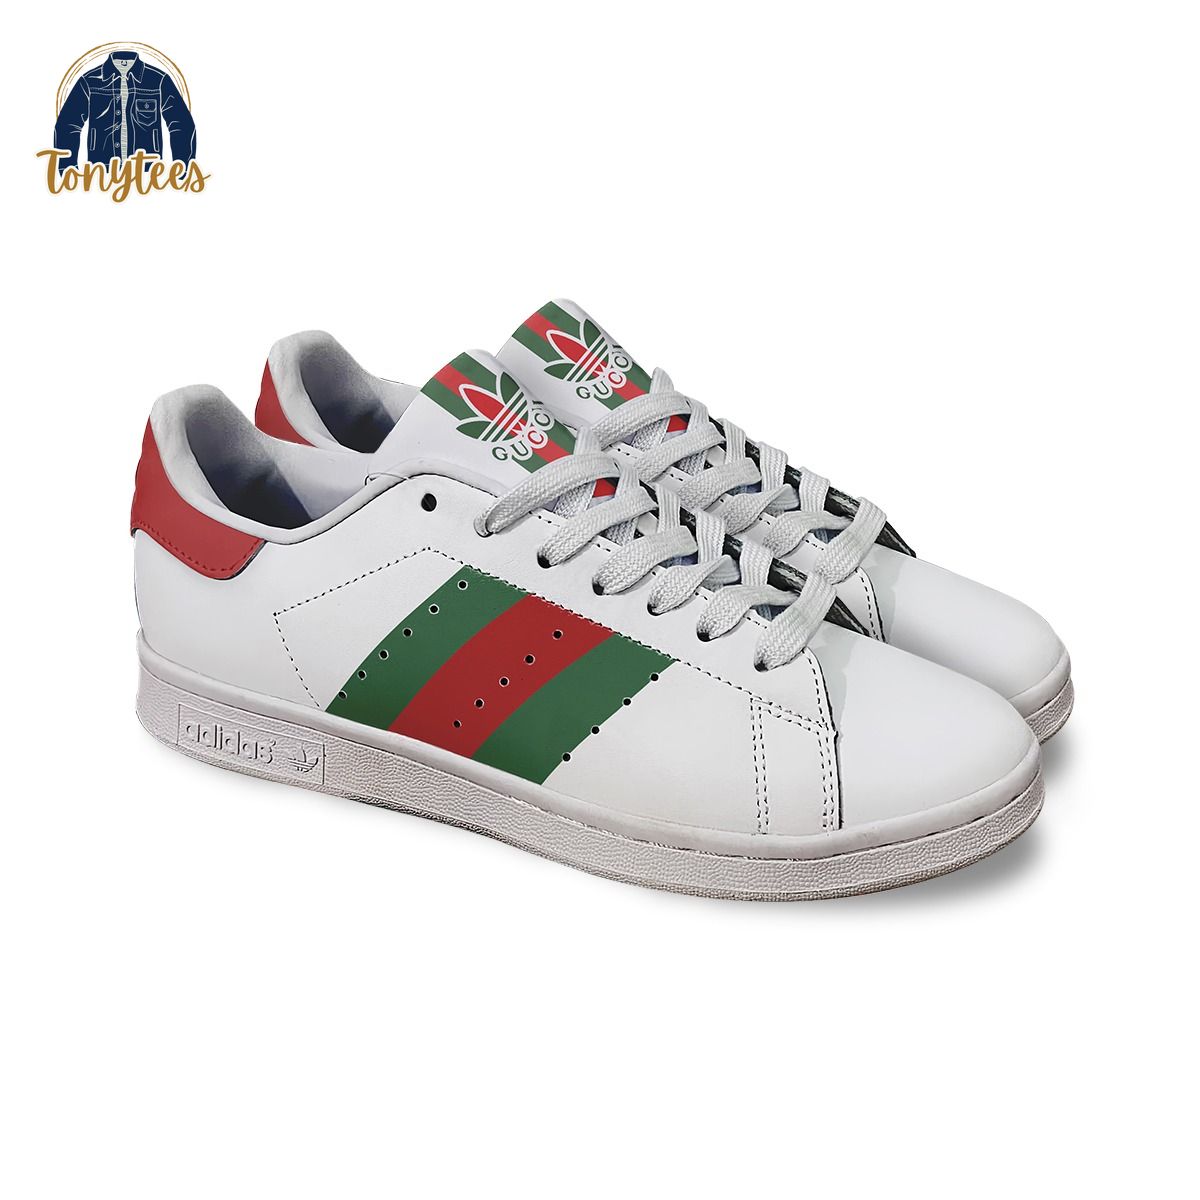 Gucci Adidas Stan Smith Sneaker Luxury Brand Shoes